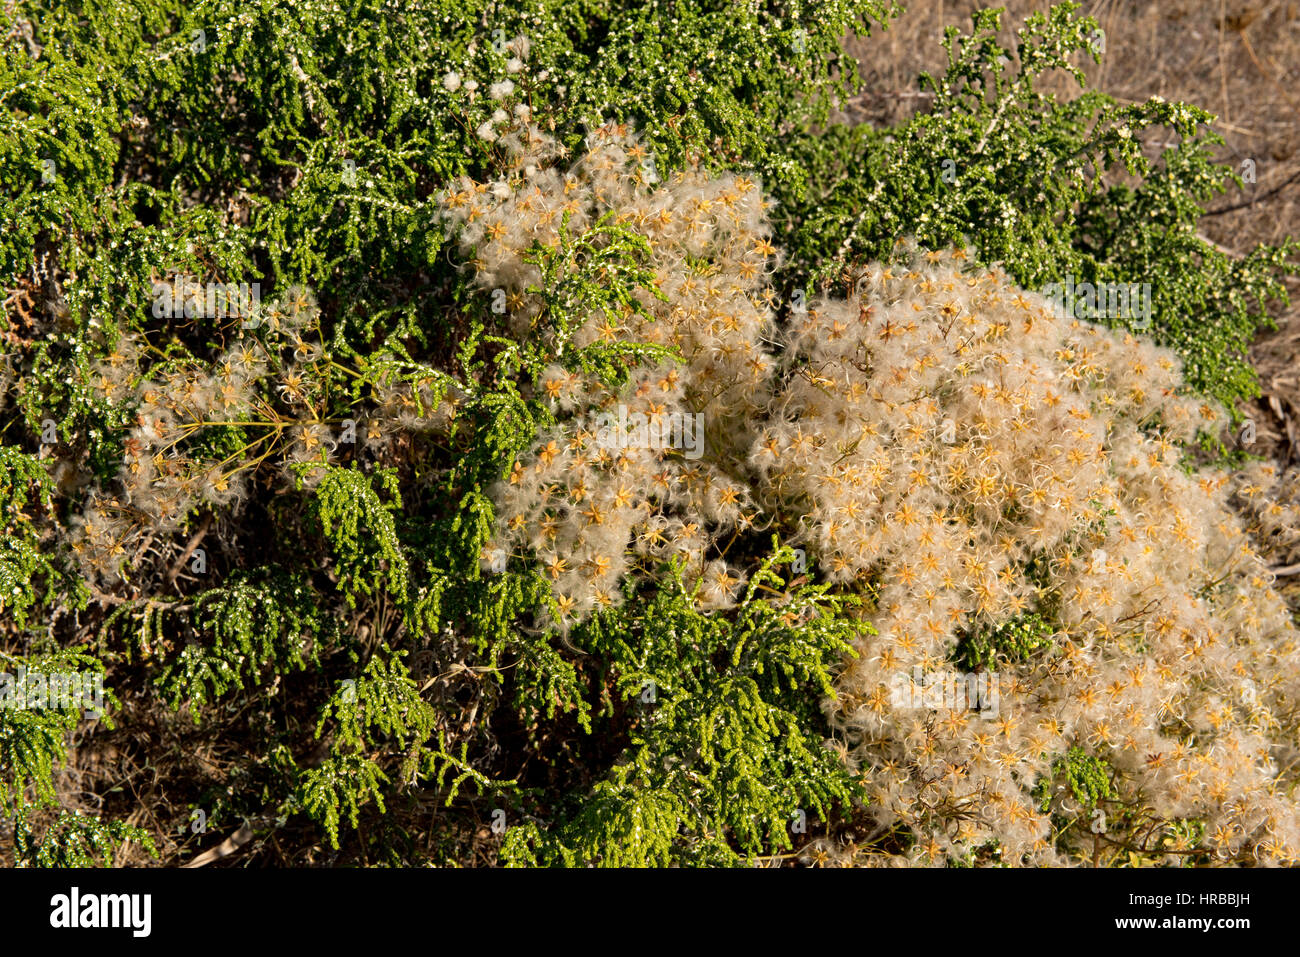 Traveller's joy, Clematis vitalba, with hairy seedheads on low growing bushes on the Mediterranean coast Stock Photo